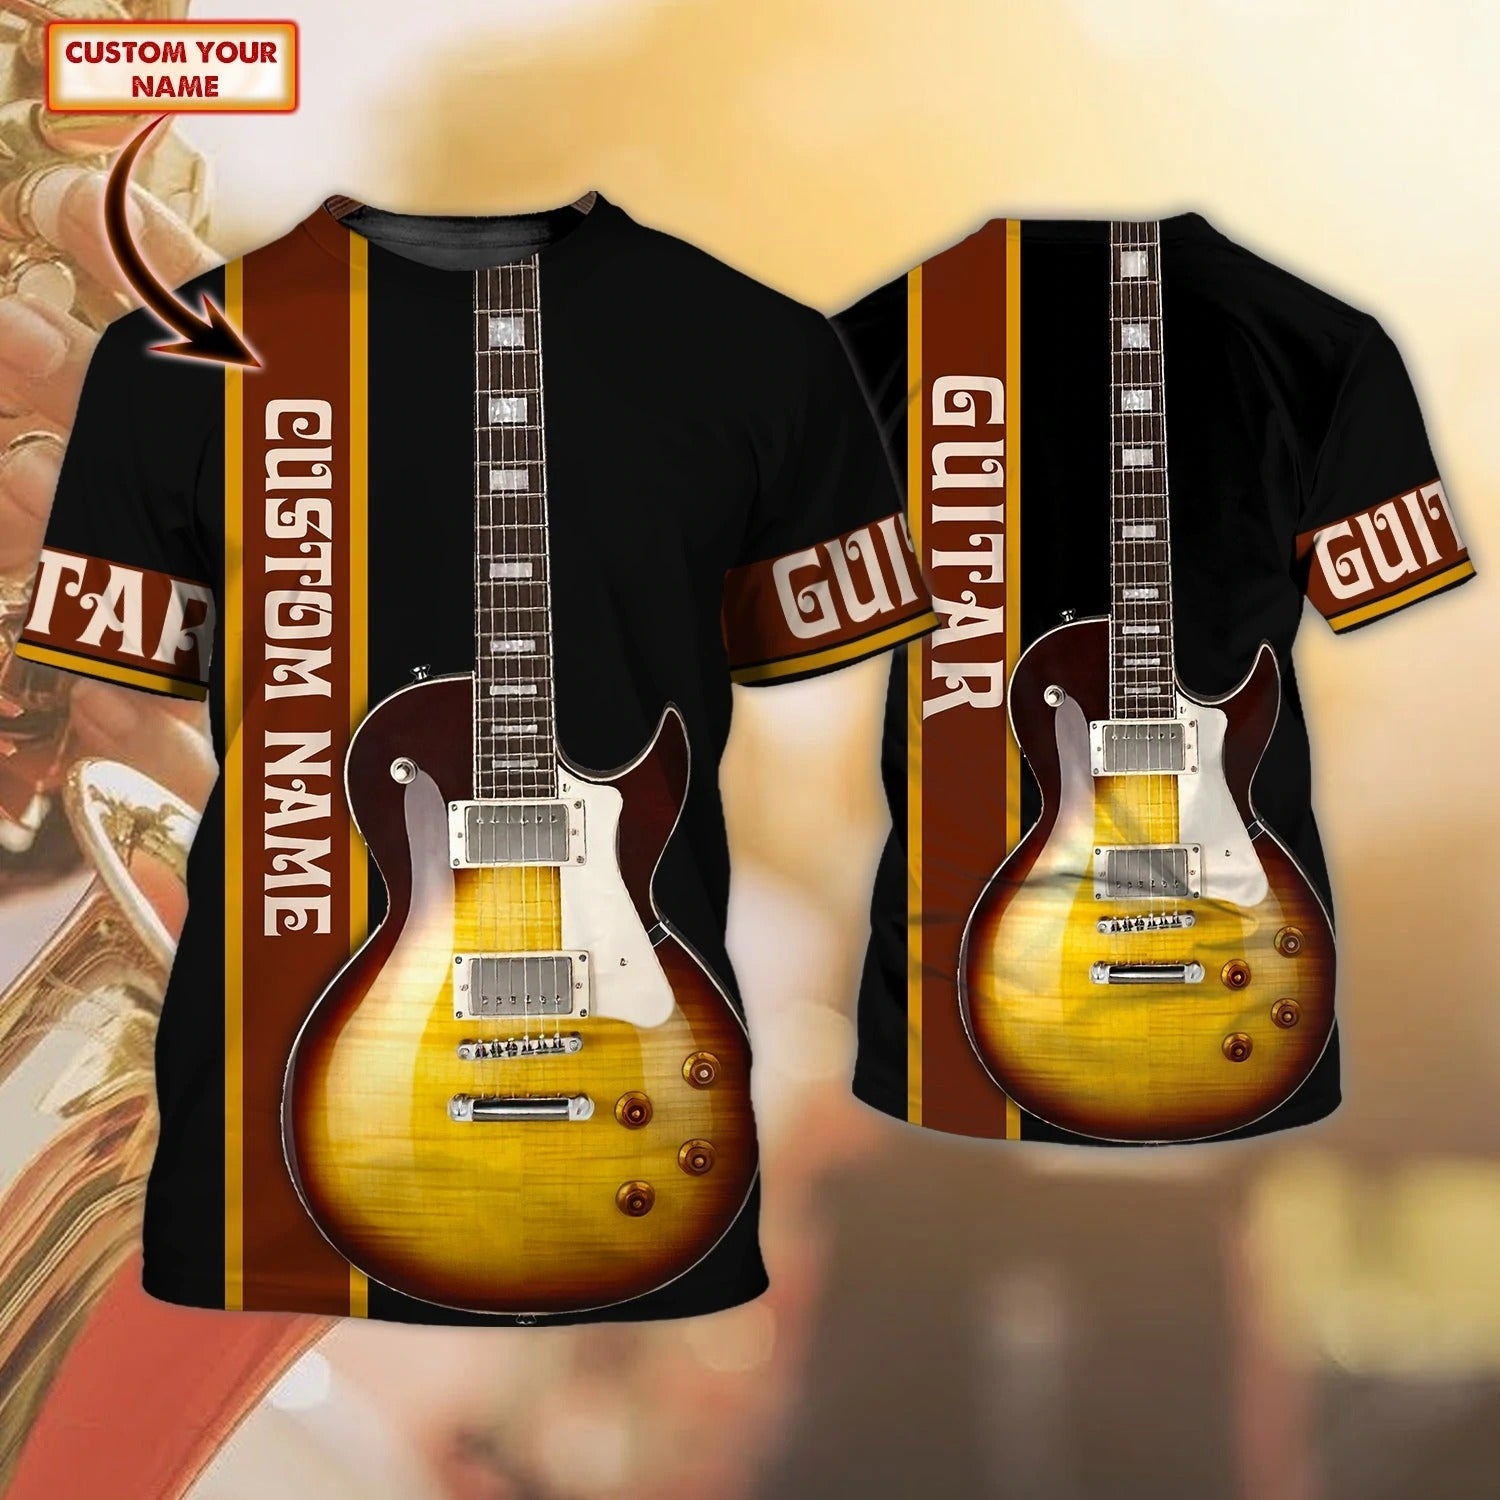 Customized Bass Guitar 3D All Over Print T Shirt For Man And Woman/ Guitarist 3D Shirt With Name/ Guitar Lovers Shirts